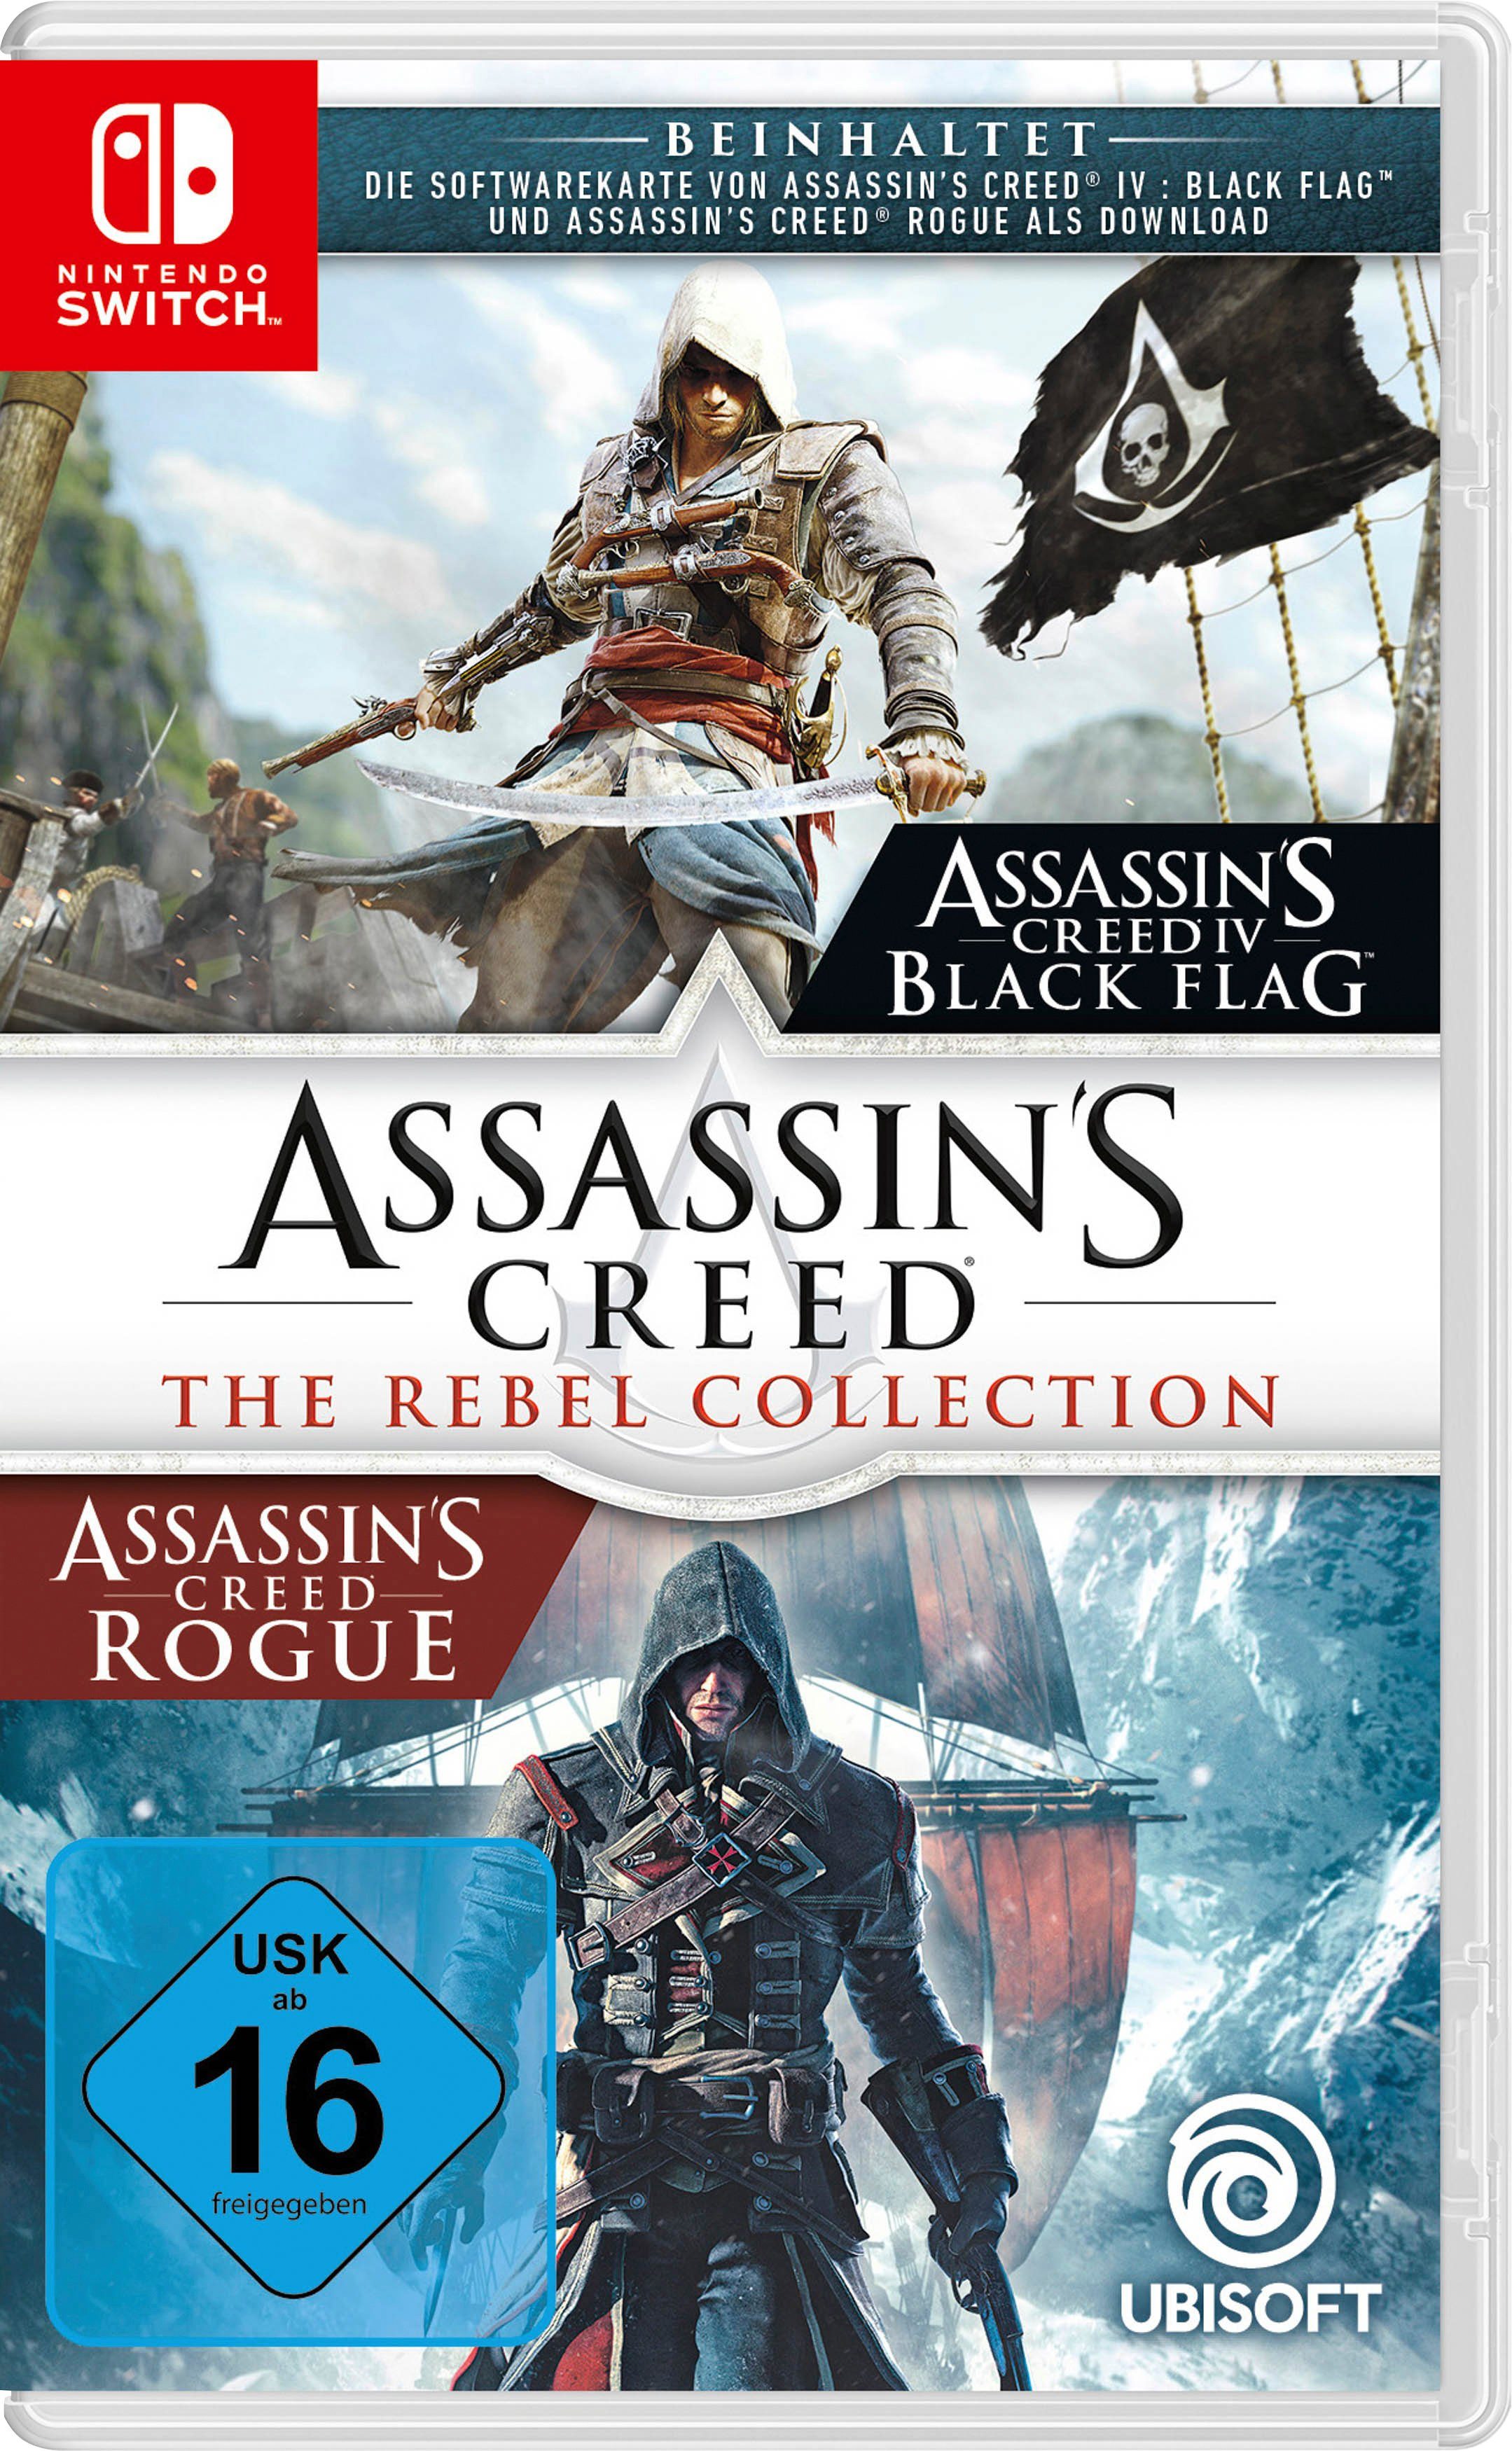 Assassin´s Nintendo Switch Collection UBISOFT The Switch Rebel Creed: